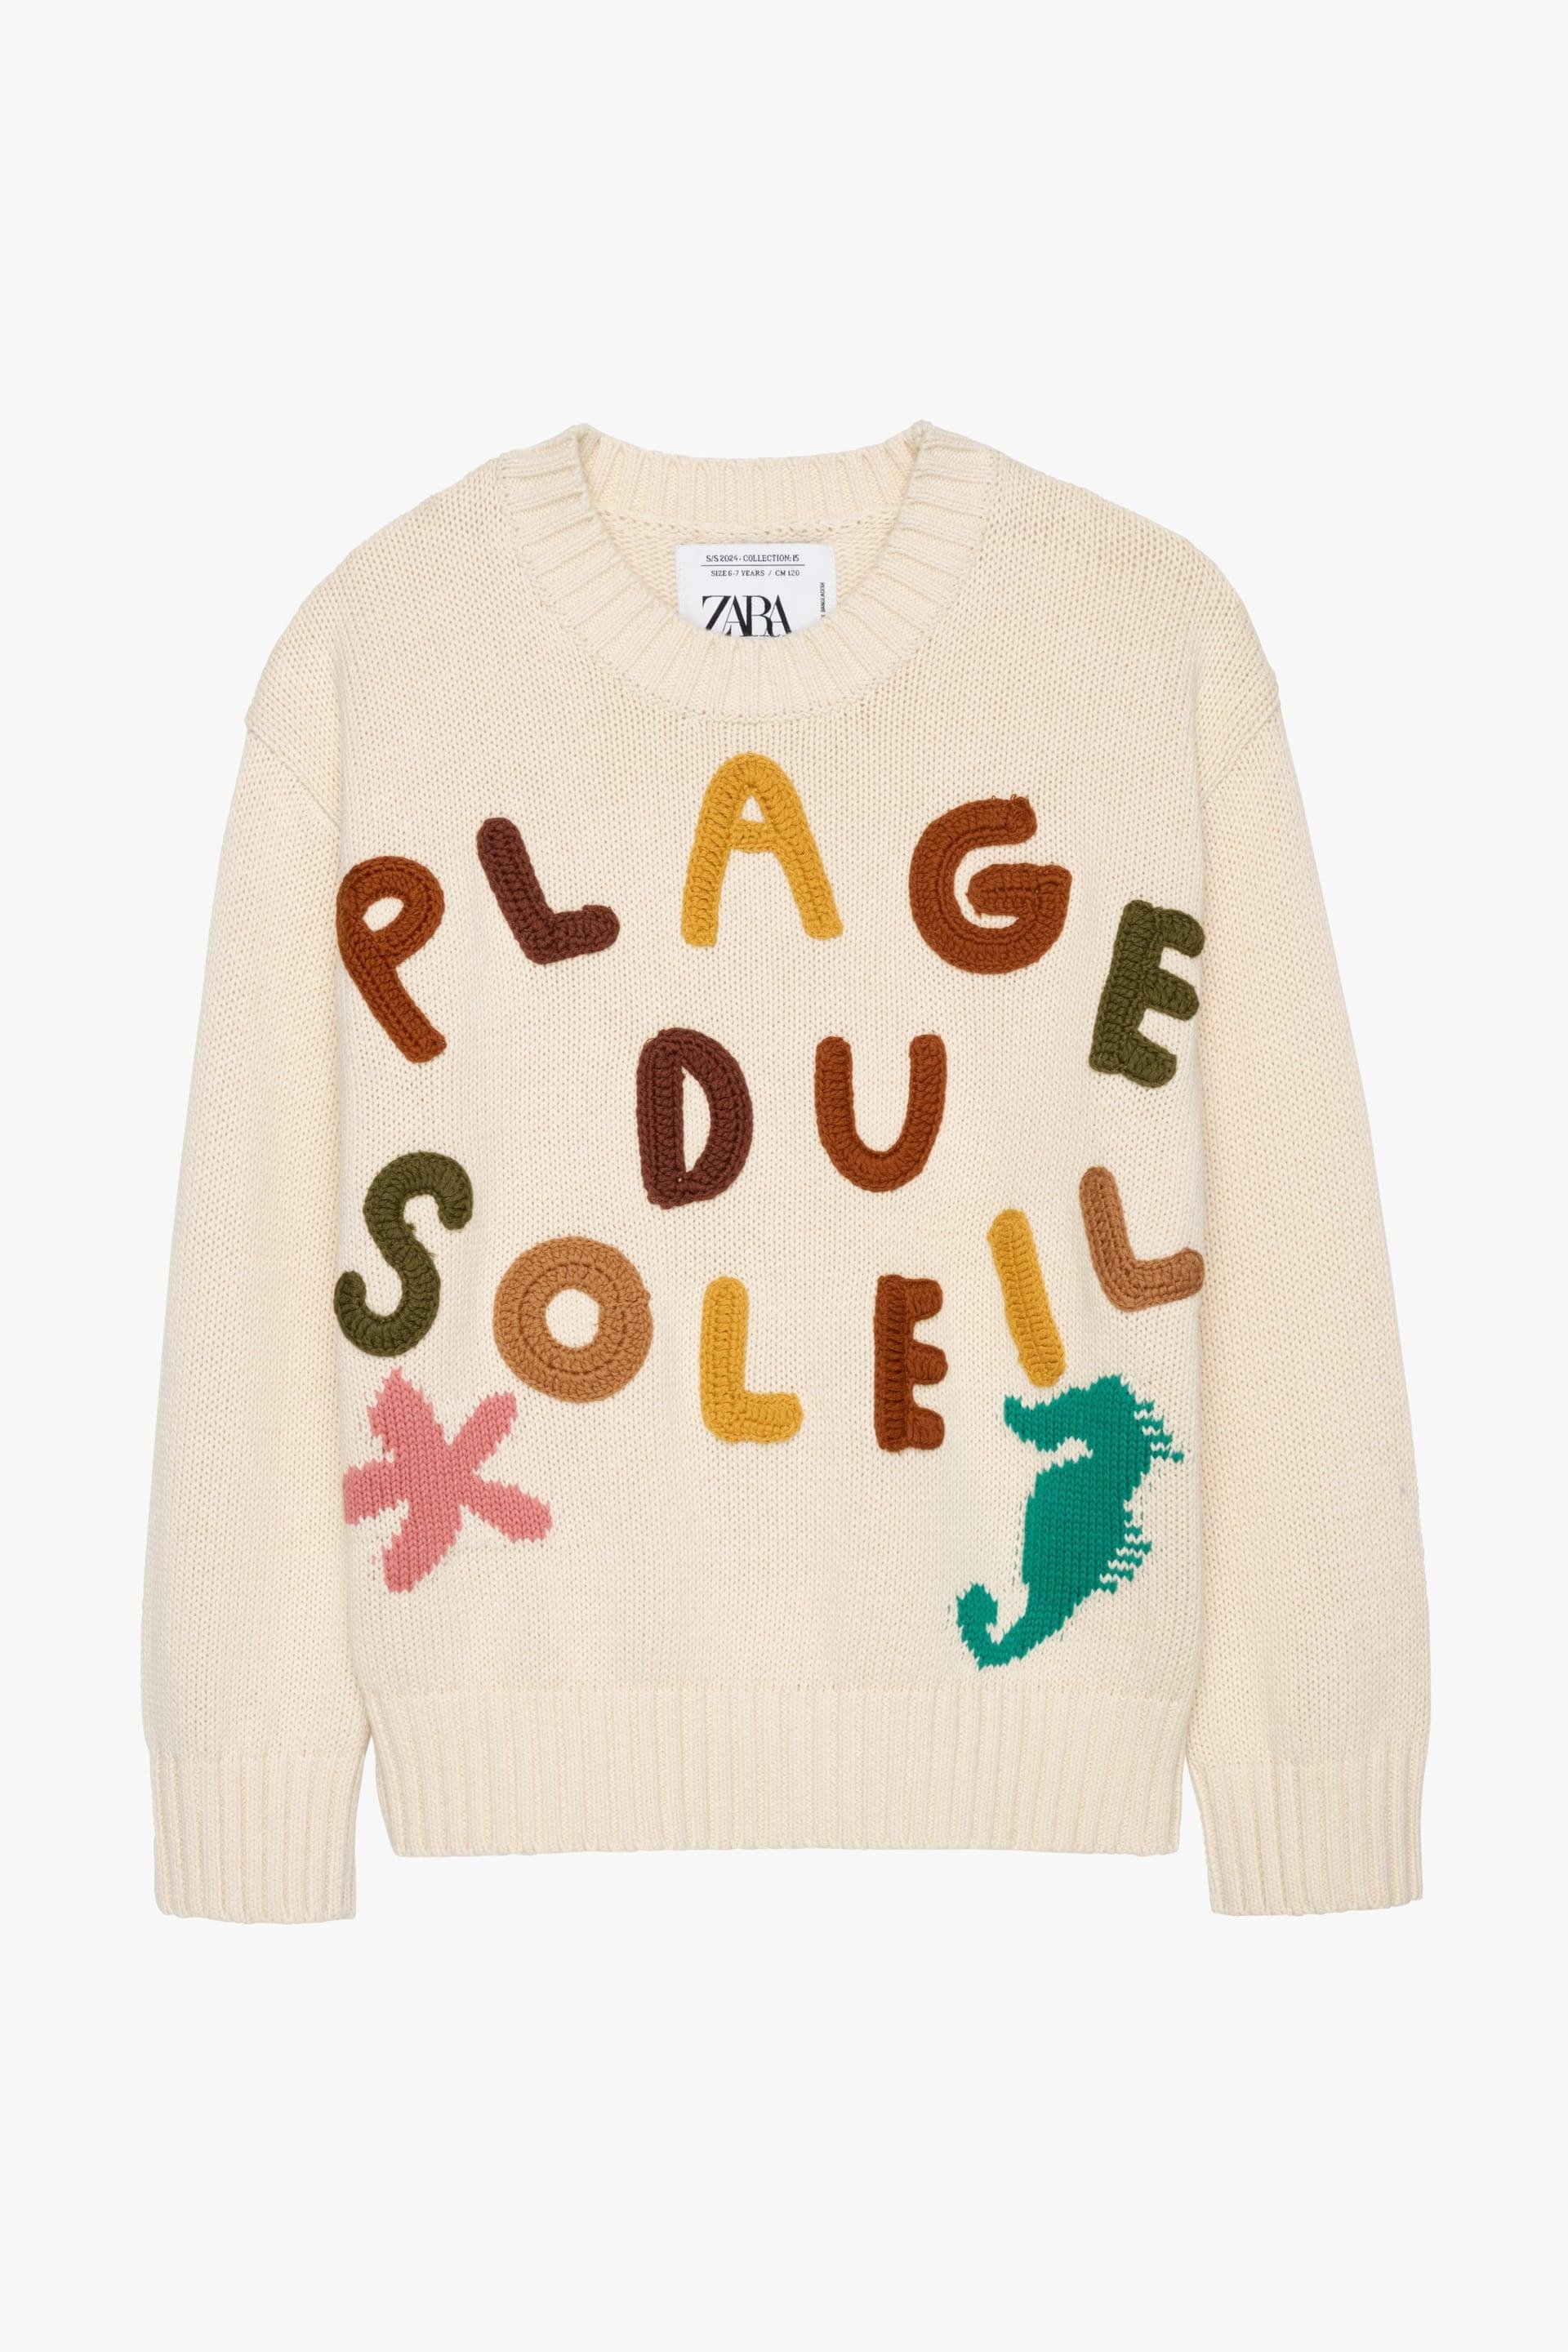 EMBROIDERED COTTON KNIT SWEATER LIMITED EDITION by ZARA